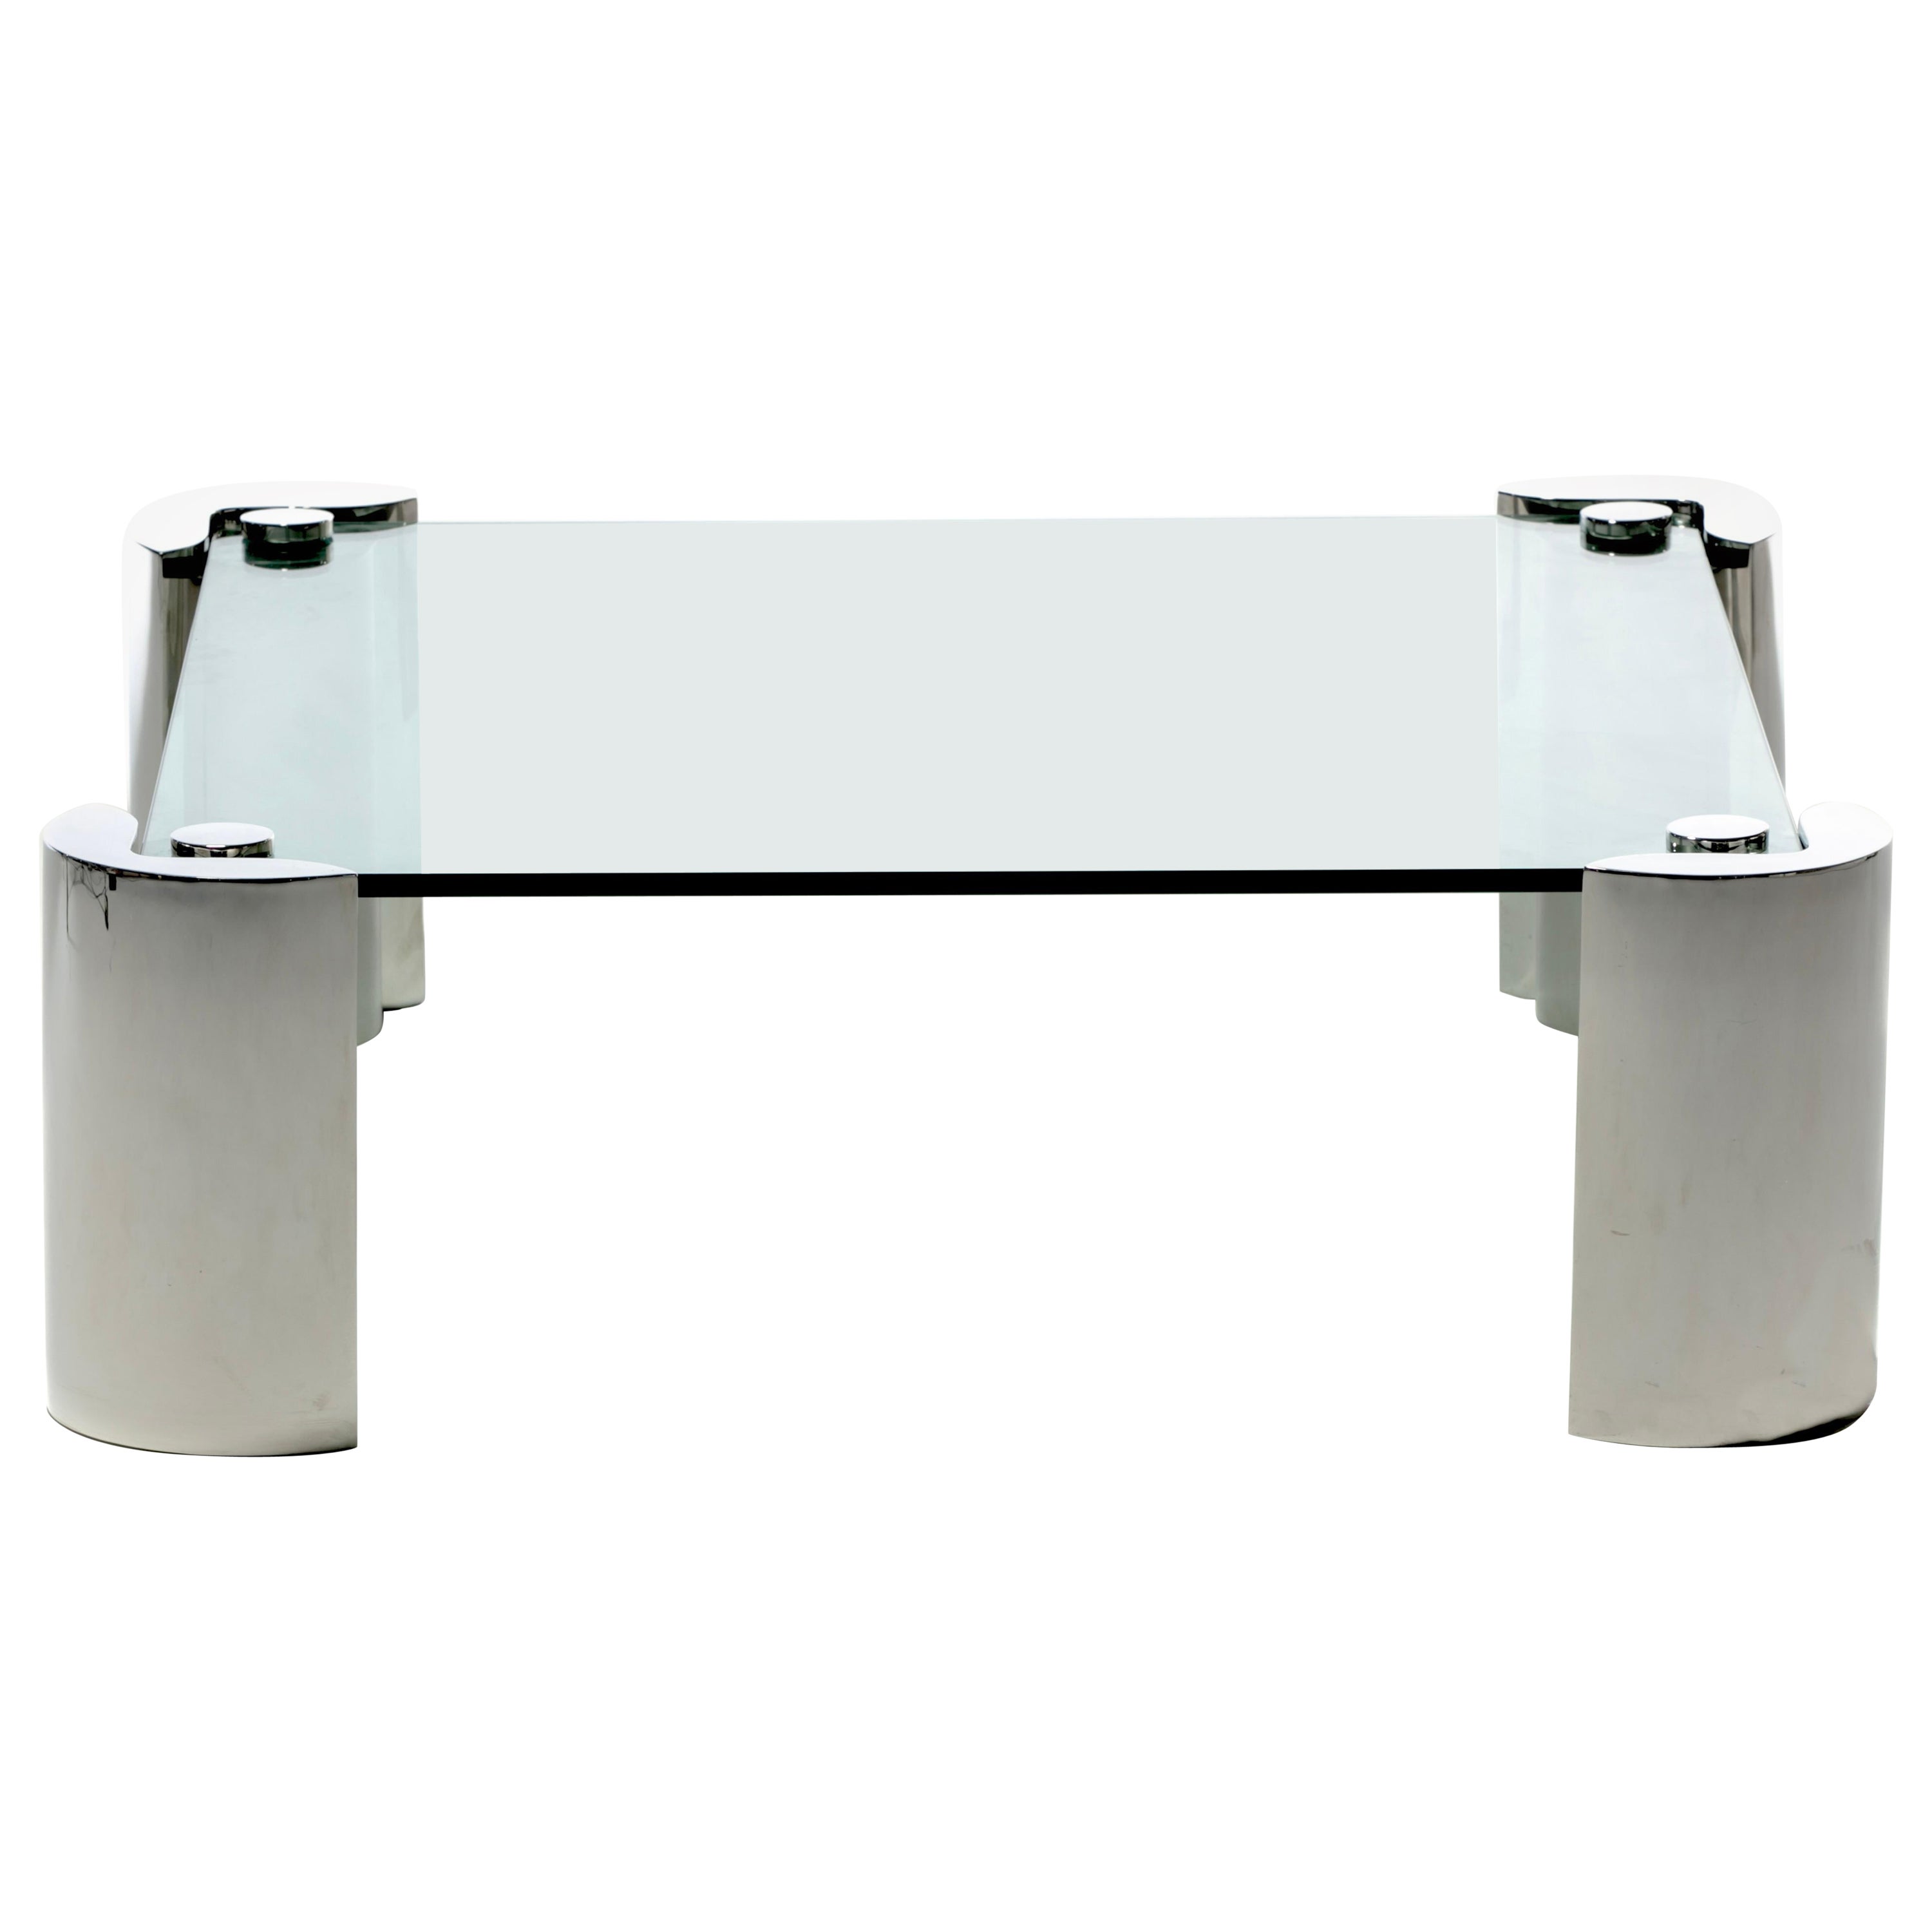 1980s Sculptural Karl Springer Coffee Table in Glass and Stainless Steel For Sale